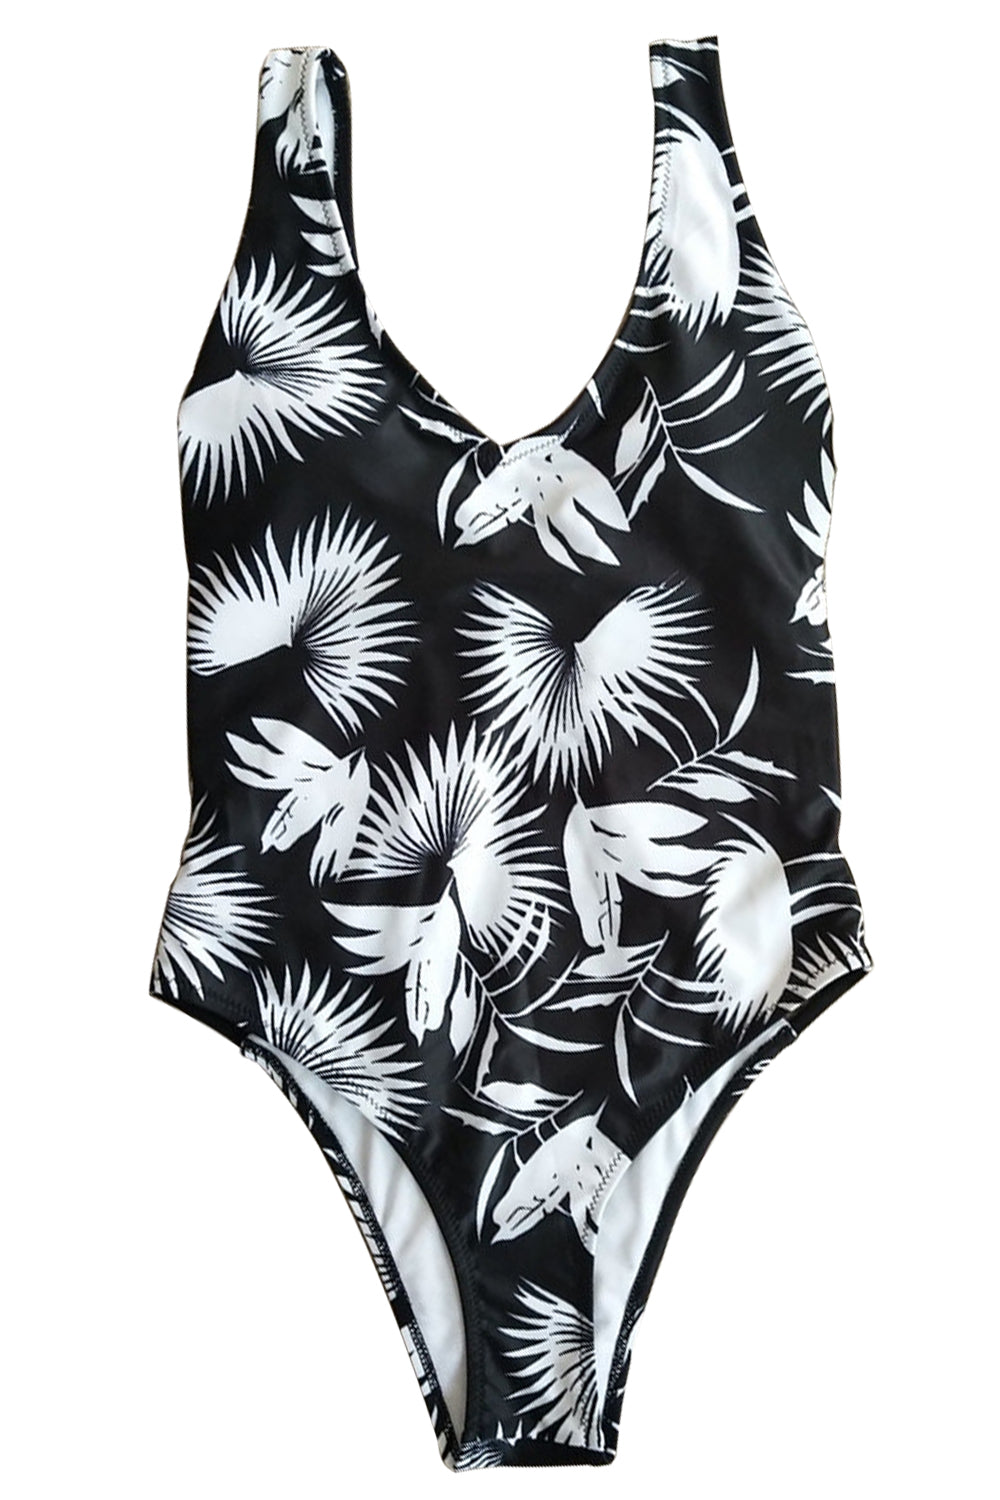 Iyasson Palm Leaves Printing One-piece Swimsuit